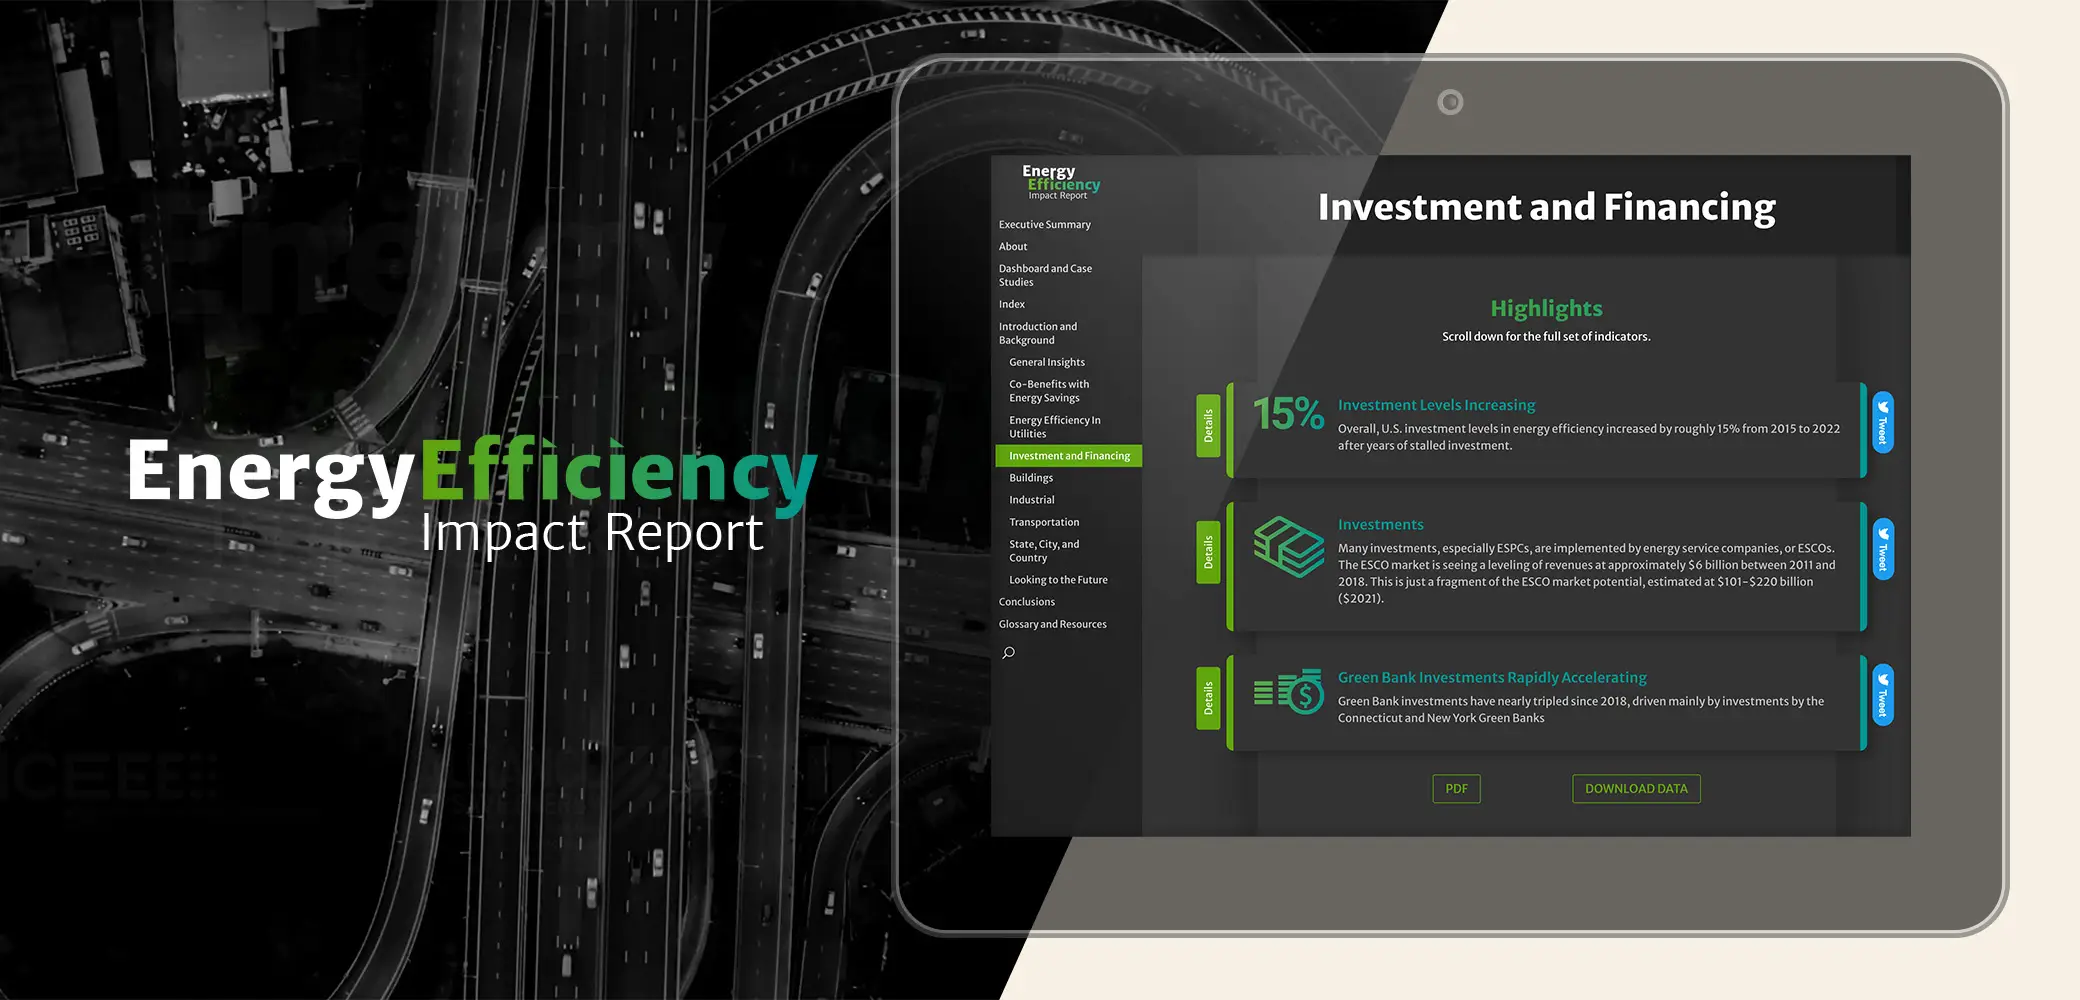 Energy Efficiency Impact Report website design and development by Red Chalk Studios, a full-service creative and marketing agency based in Virginia.